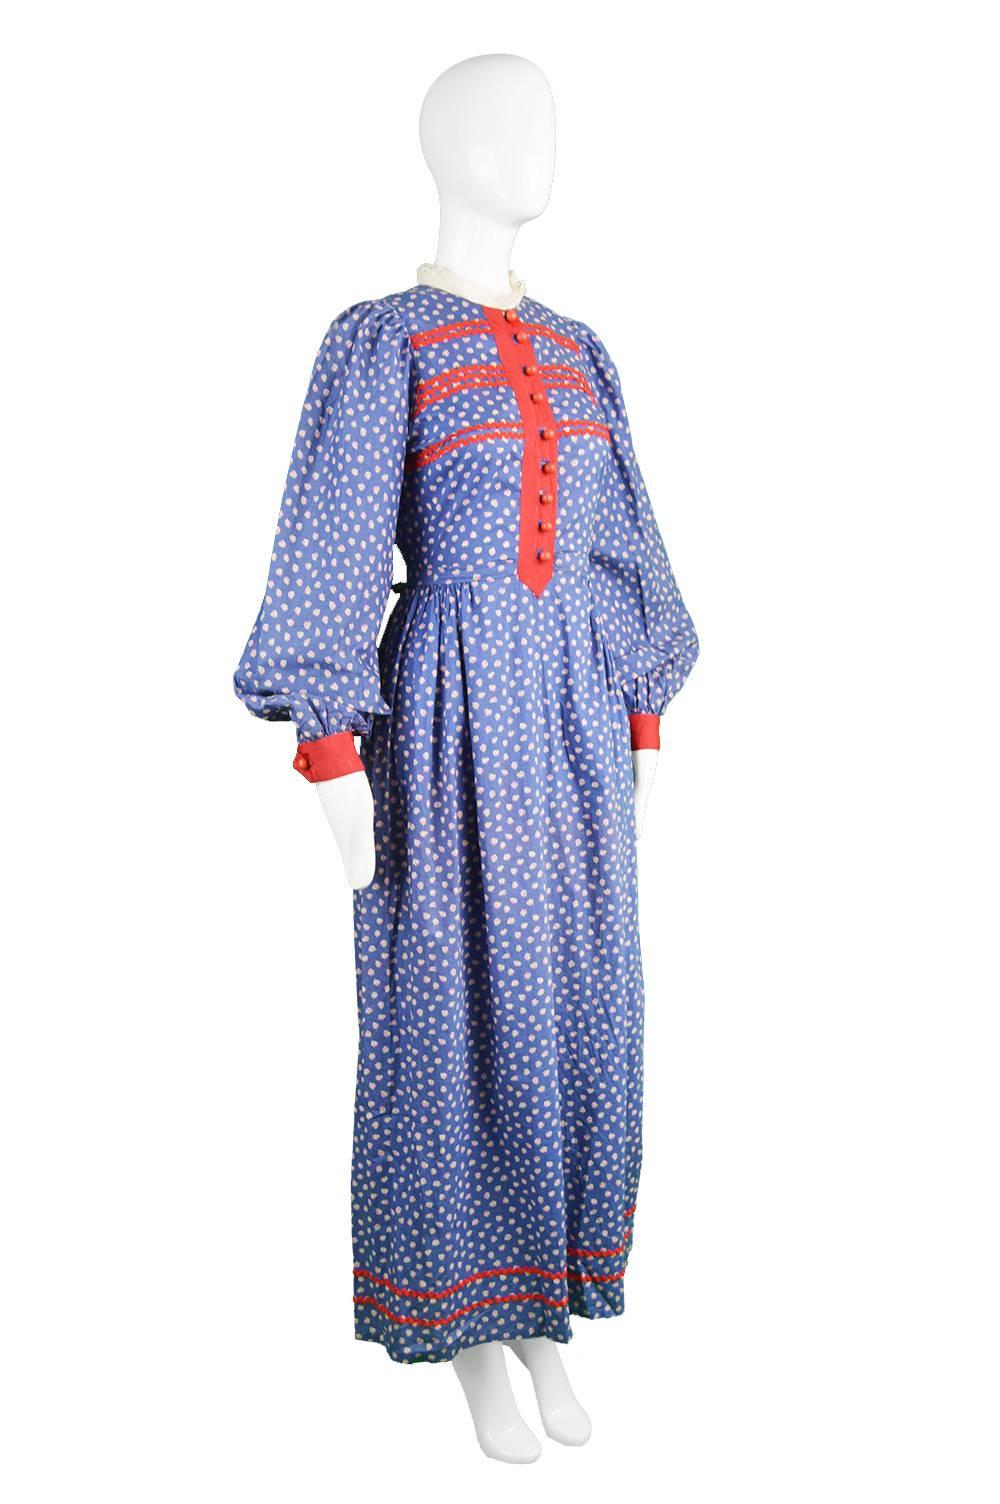 Women's Mary Quant Blue & Red Peasant Dress with Ditsy Floral Print, 1970s